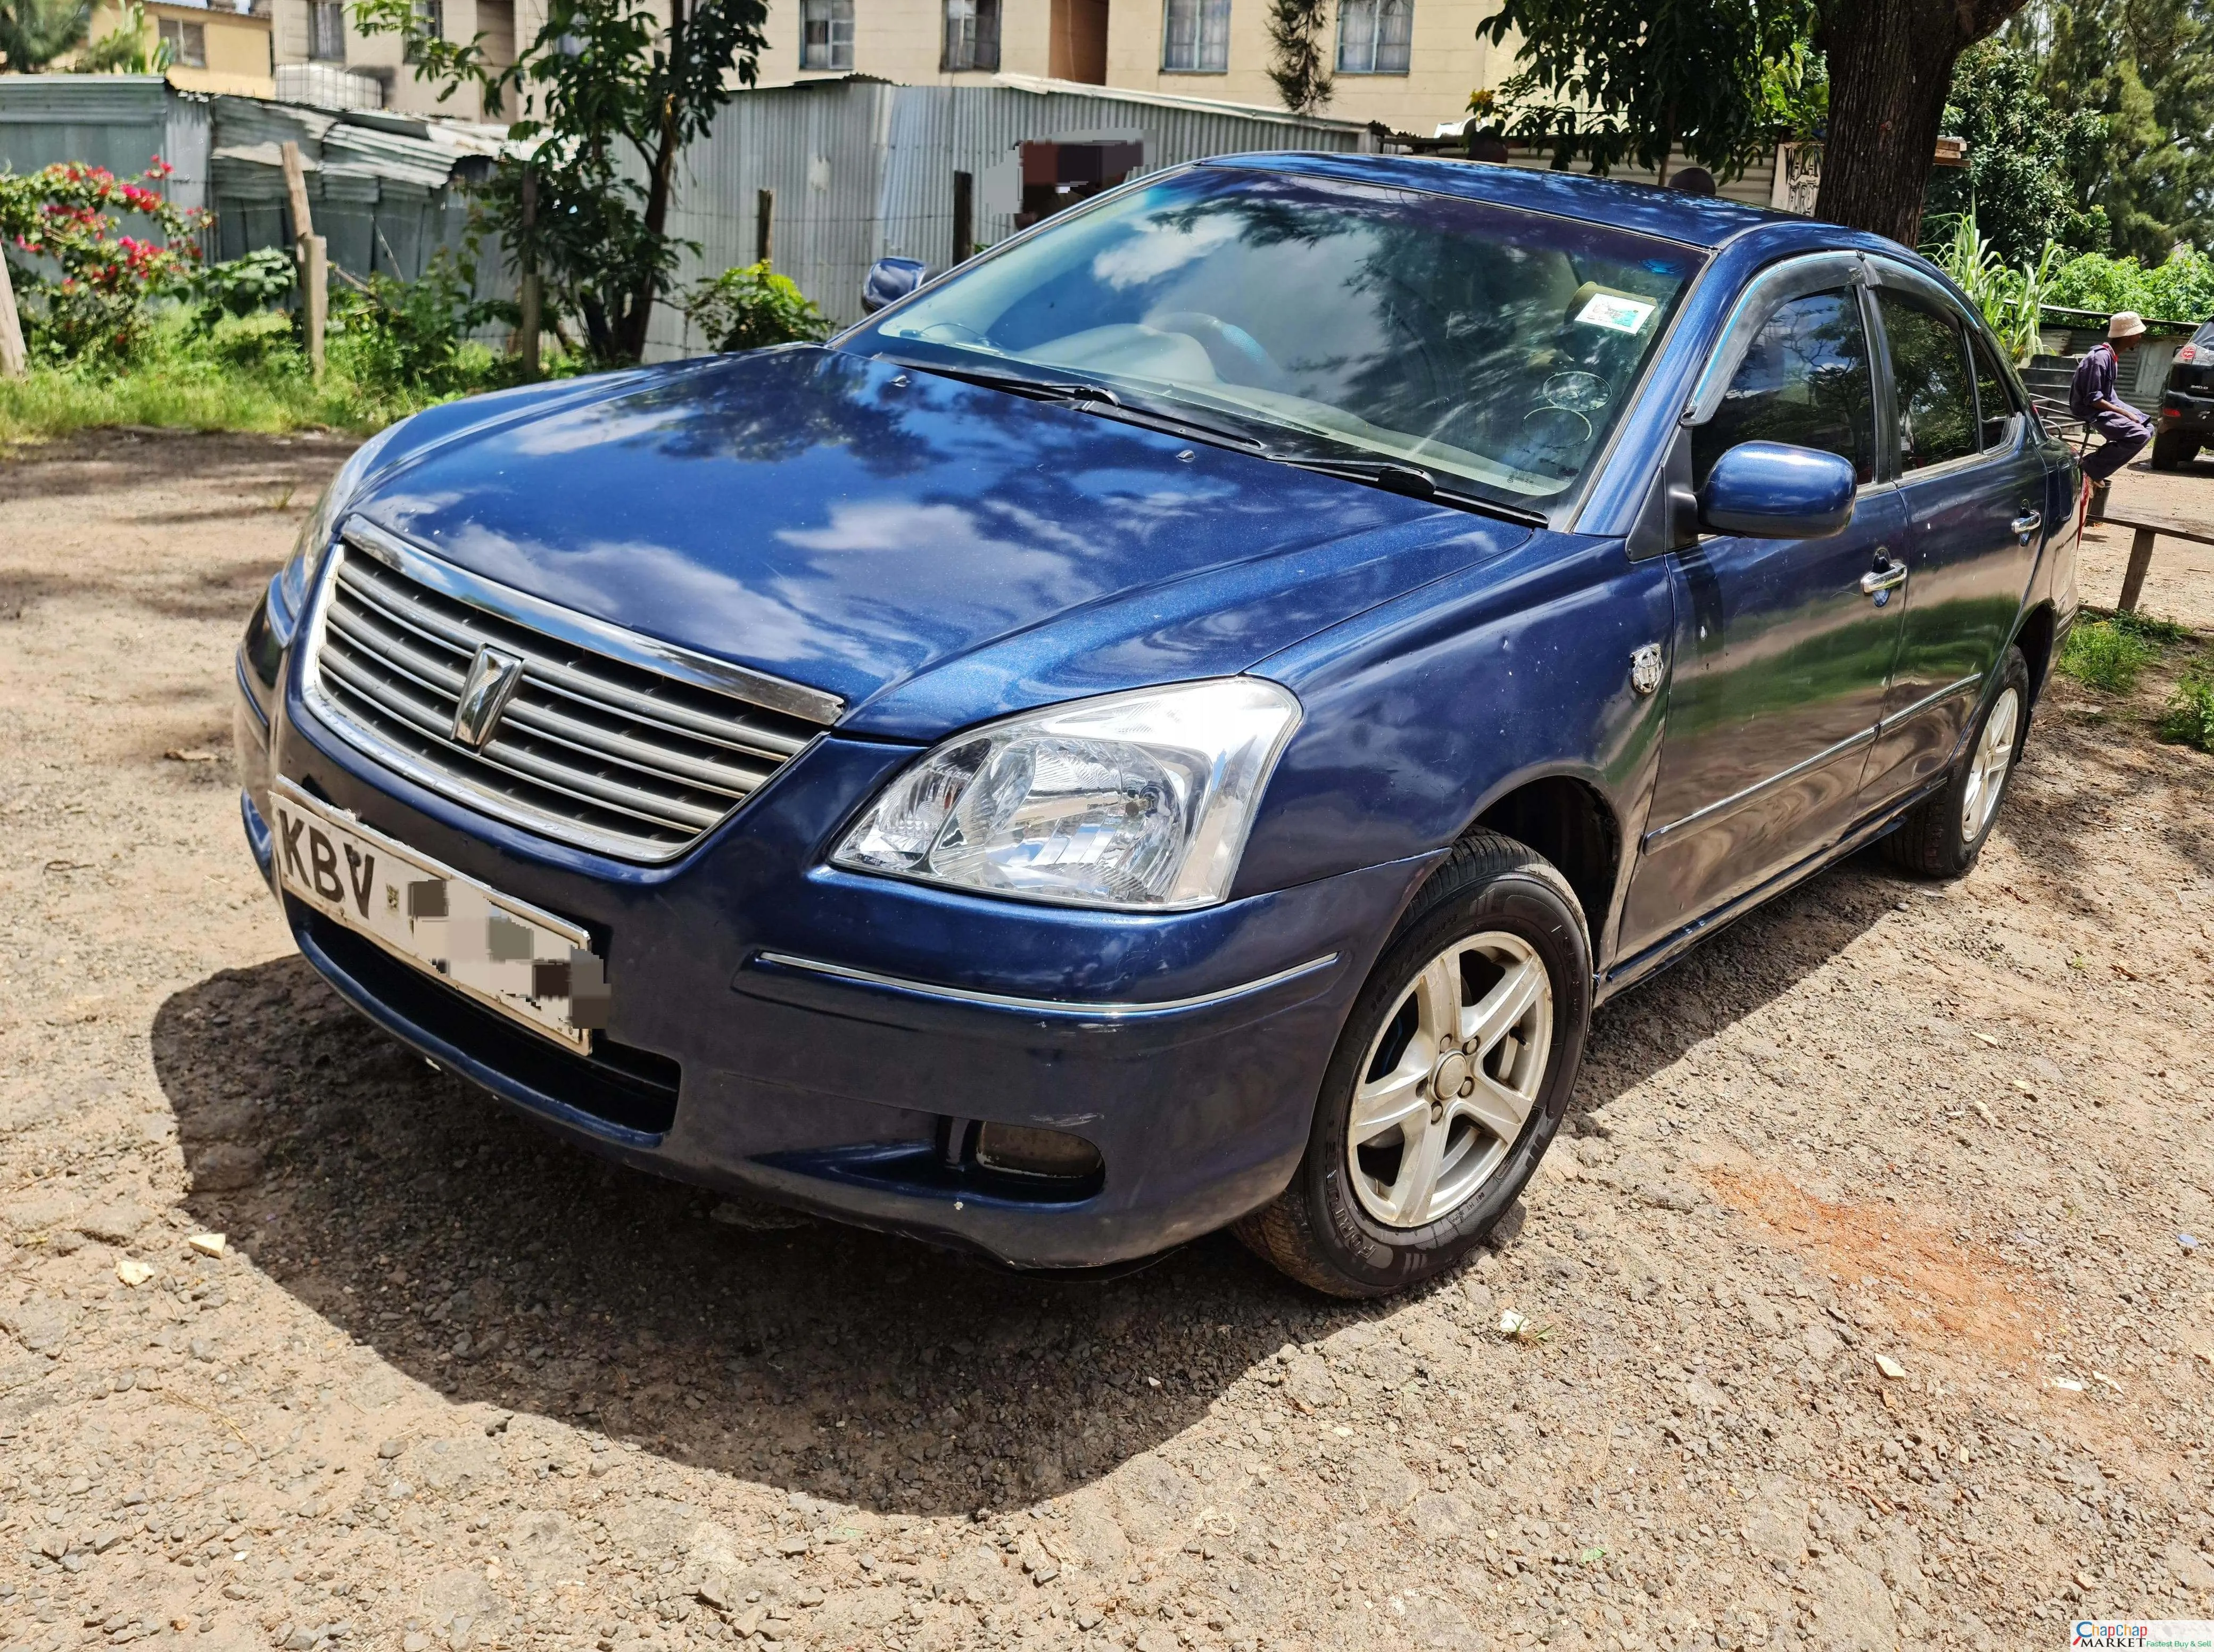 Toyota PREMIO QUICKEST SALE 🔥 🔥 for sale in Kenya new shape You pay 30% Deposit 240 Trade in Ok EXCLUSIVE